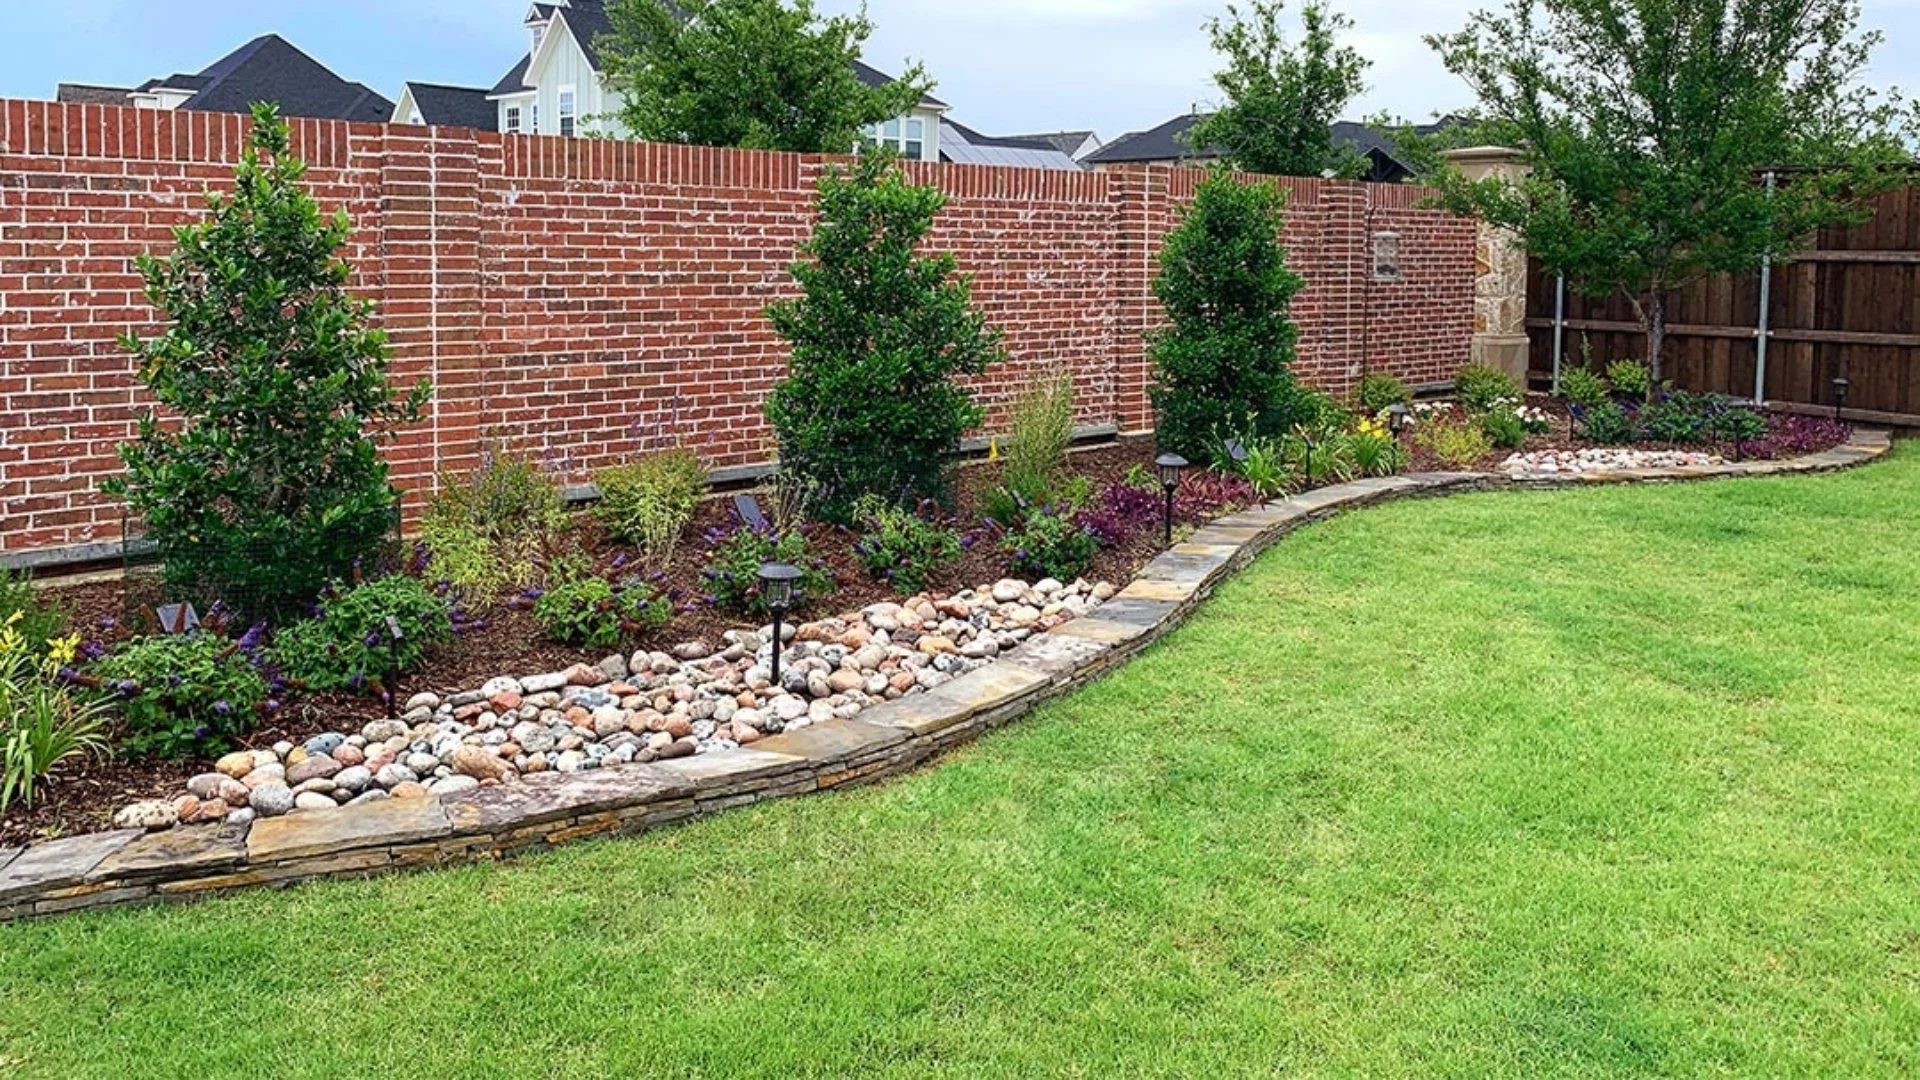 Green lawn and maintained landscape in Plano, TX.